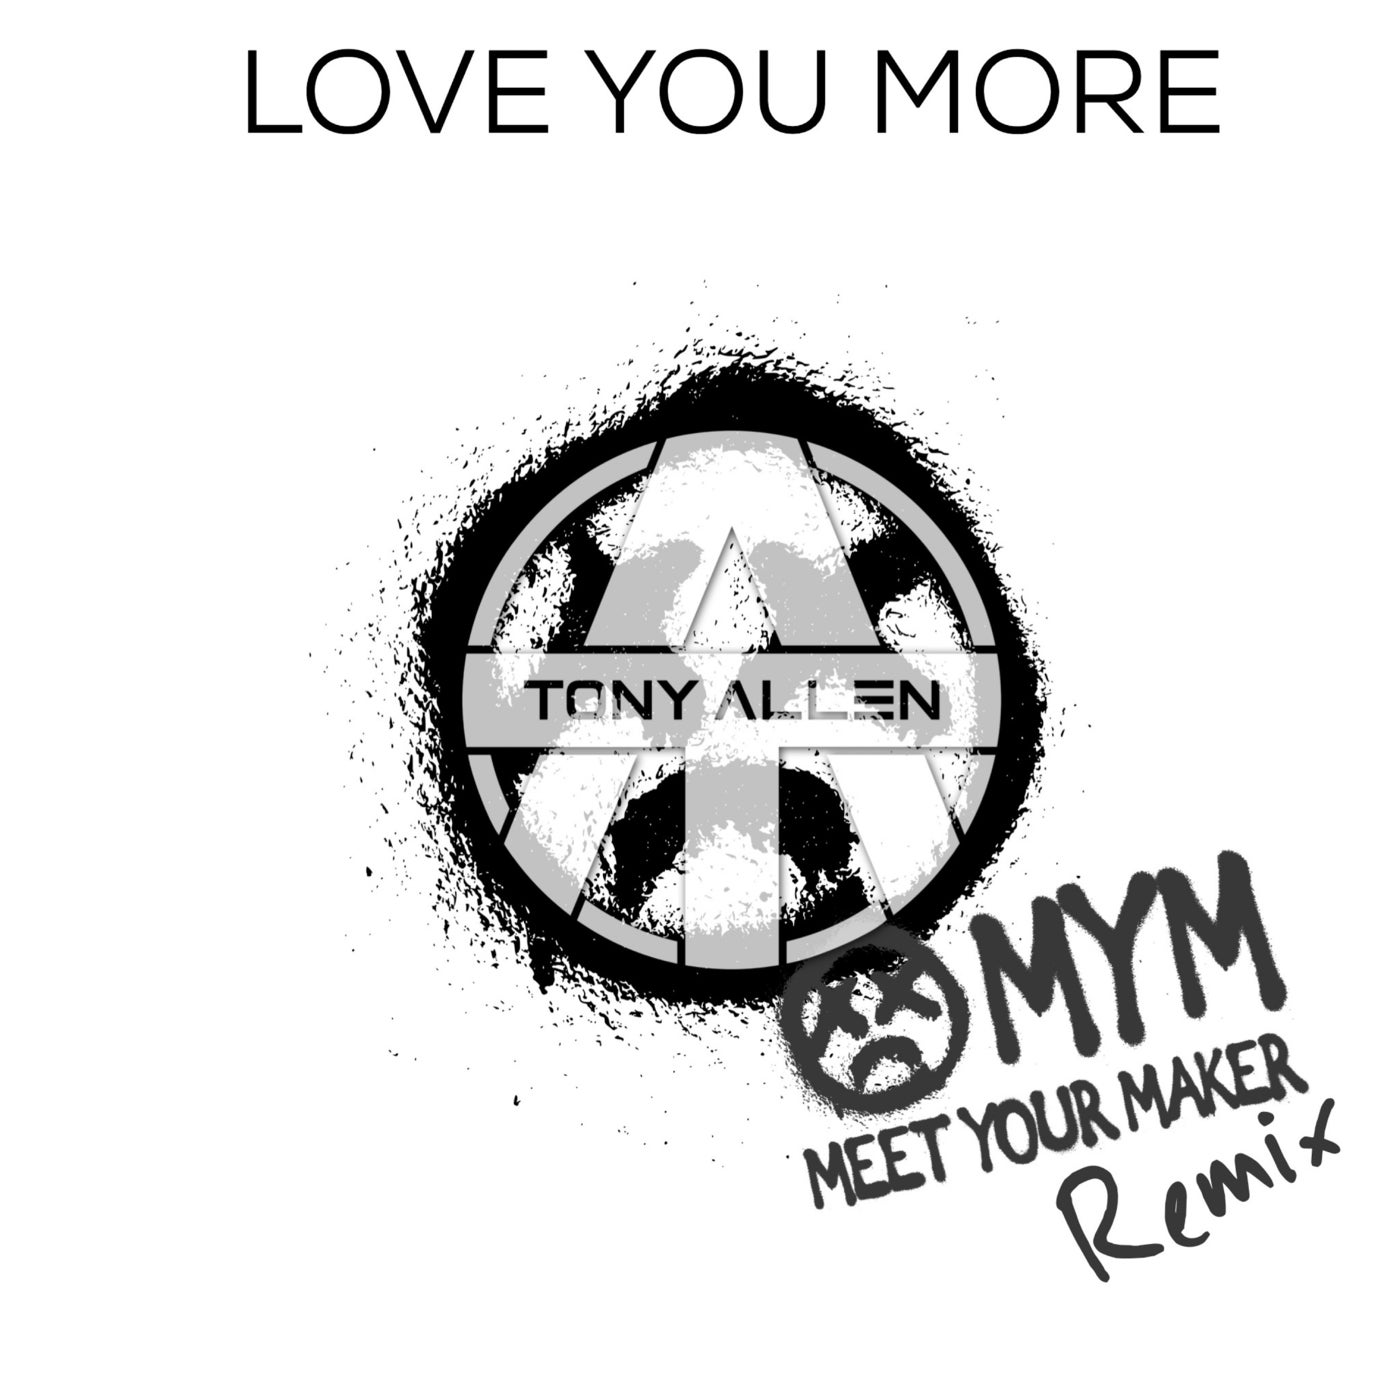 Love You More (MYM Remix)